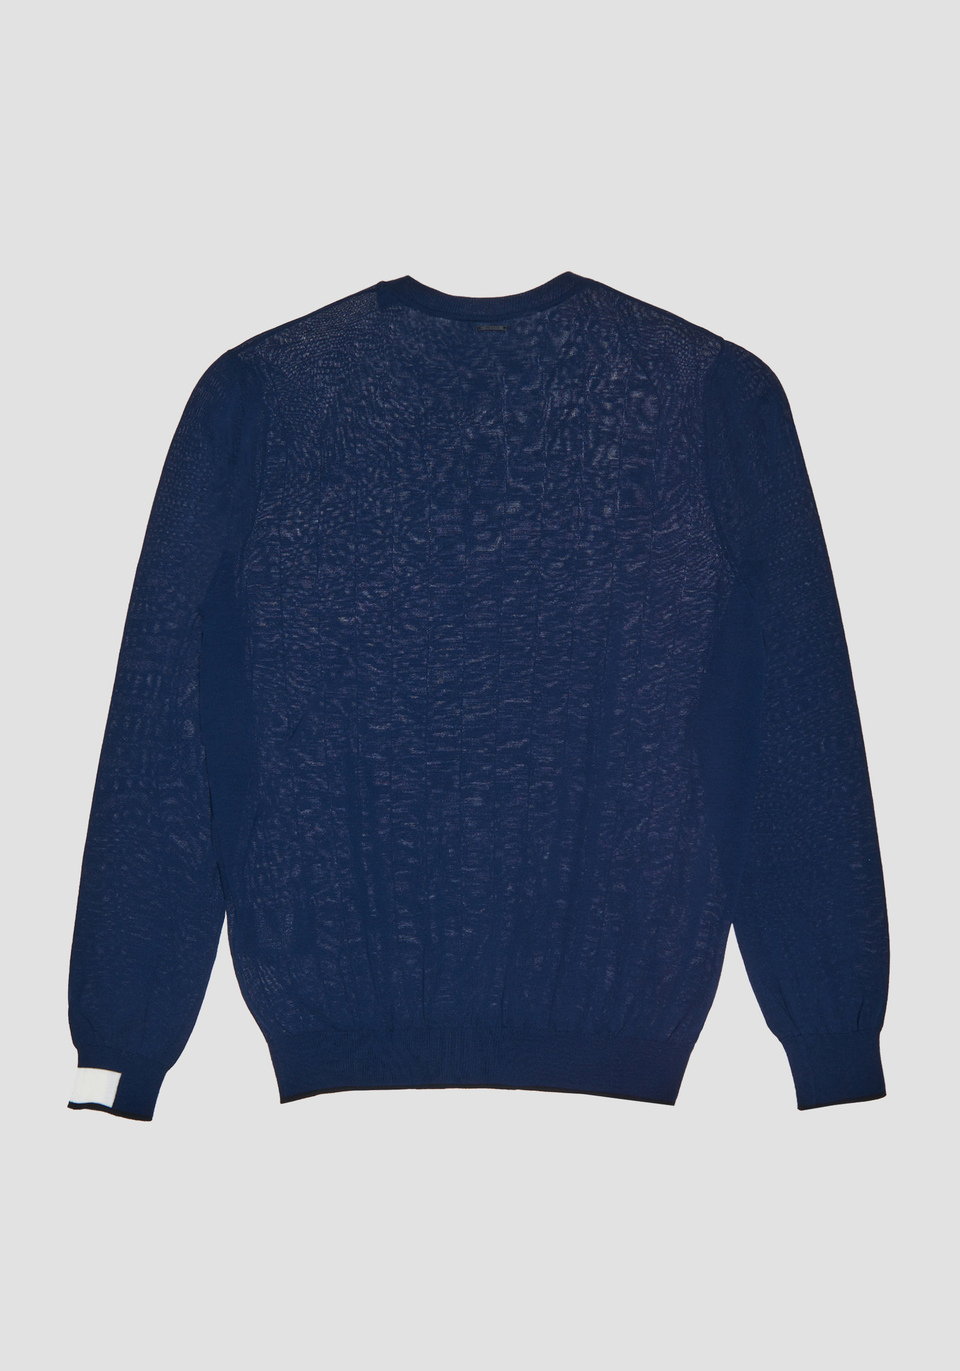 SLIM-FIT SWEATER IN 100% COMPACT COTTON YARN WITH A GEOMETRIC JACQUARD PATTERN - Antony Morato Online Shop